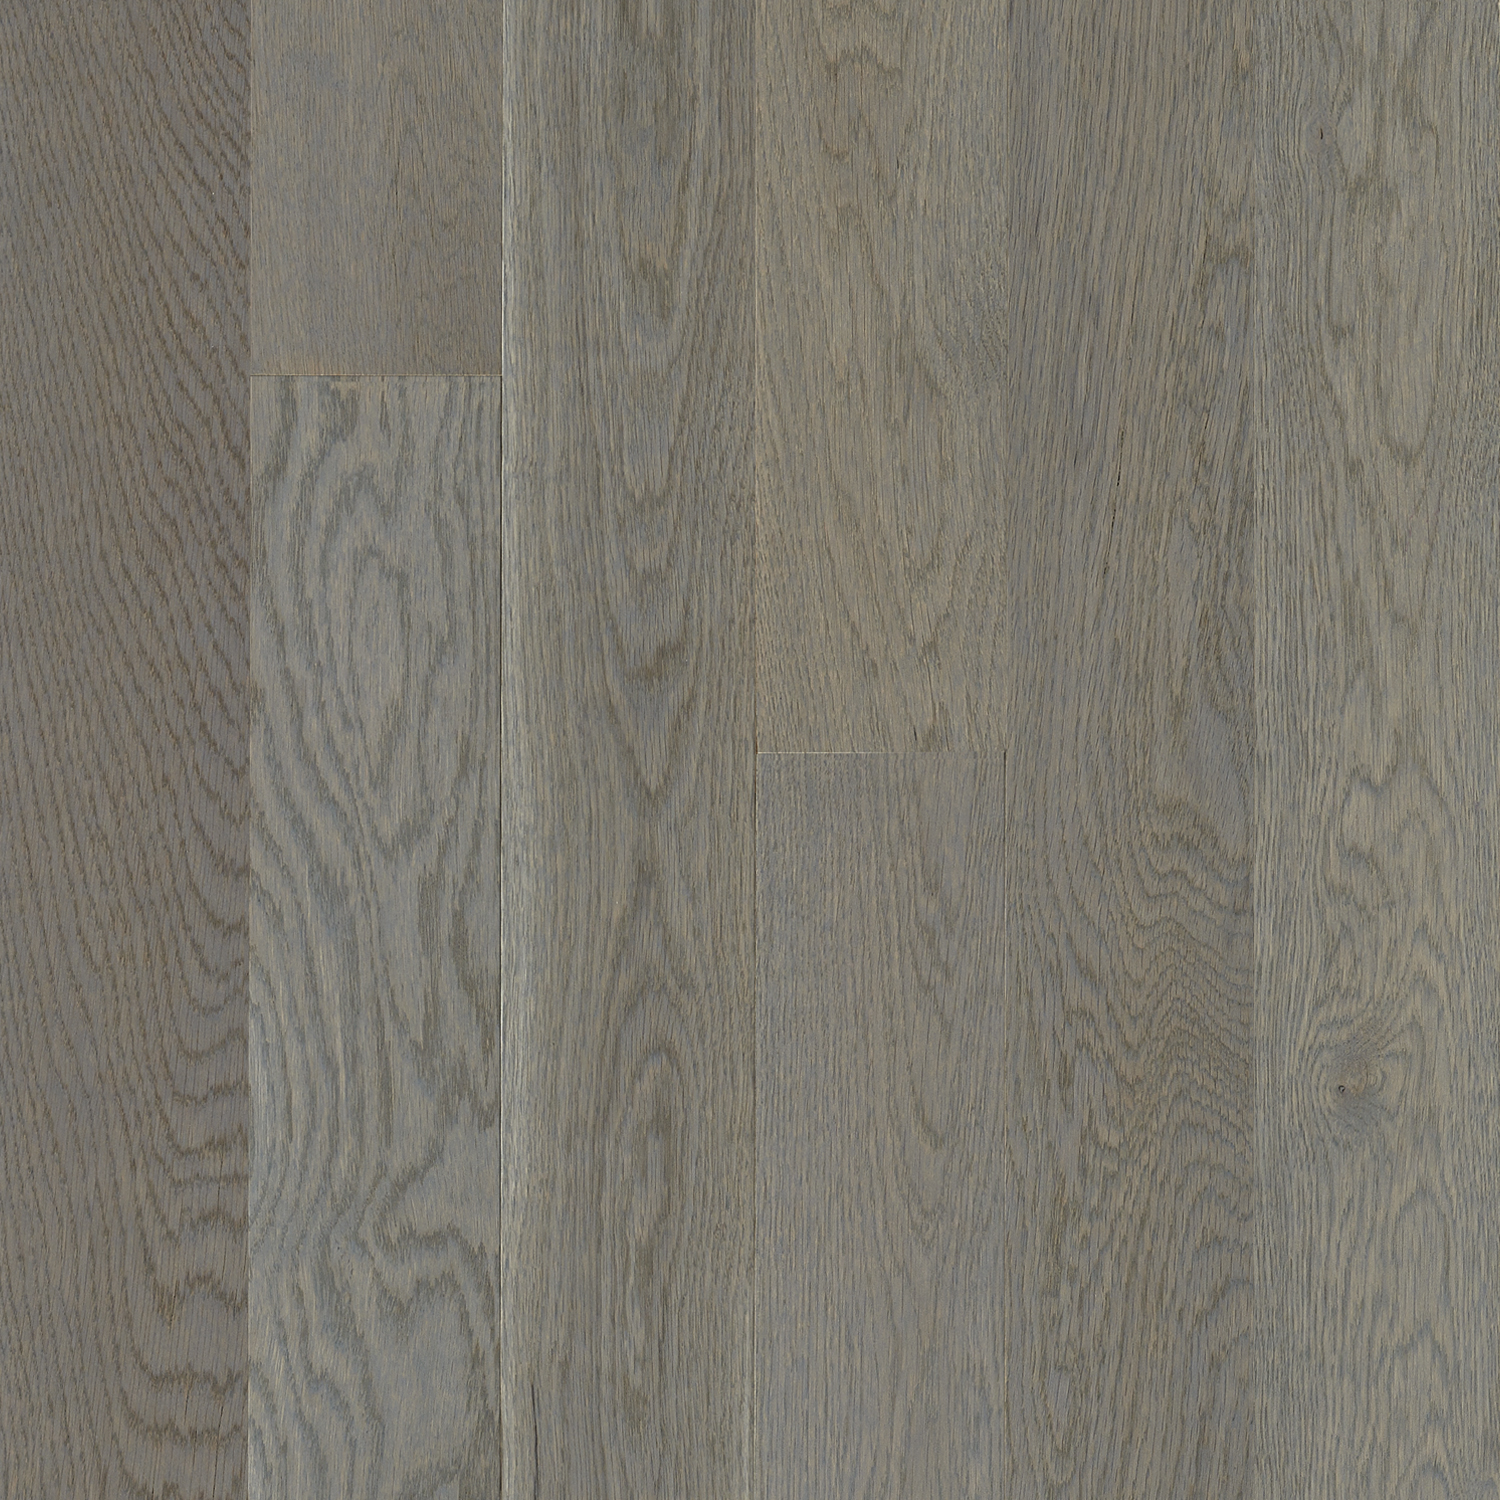 Natural Forest Understated Gray Solid Hardwood NFSK442S